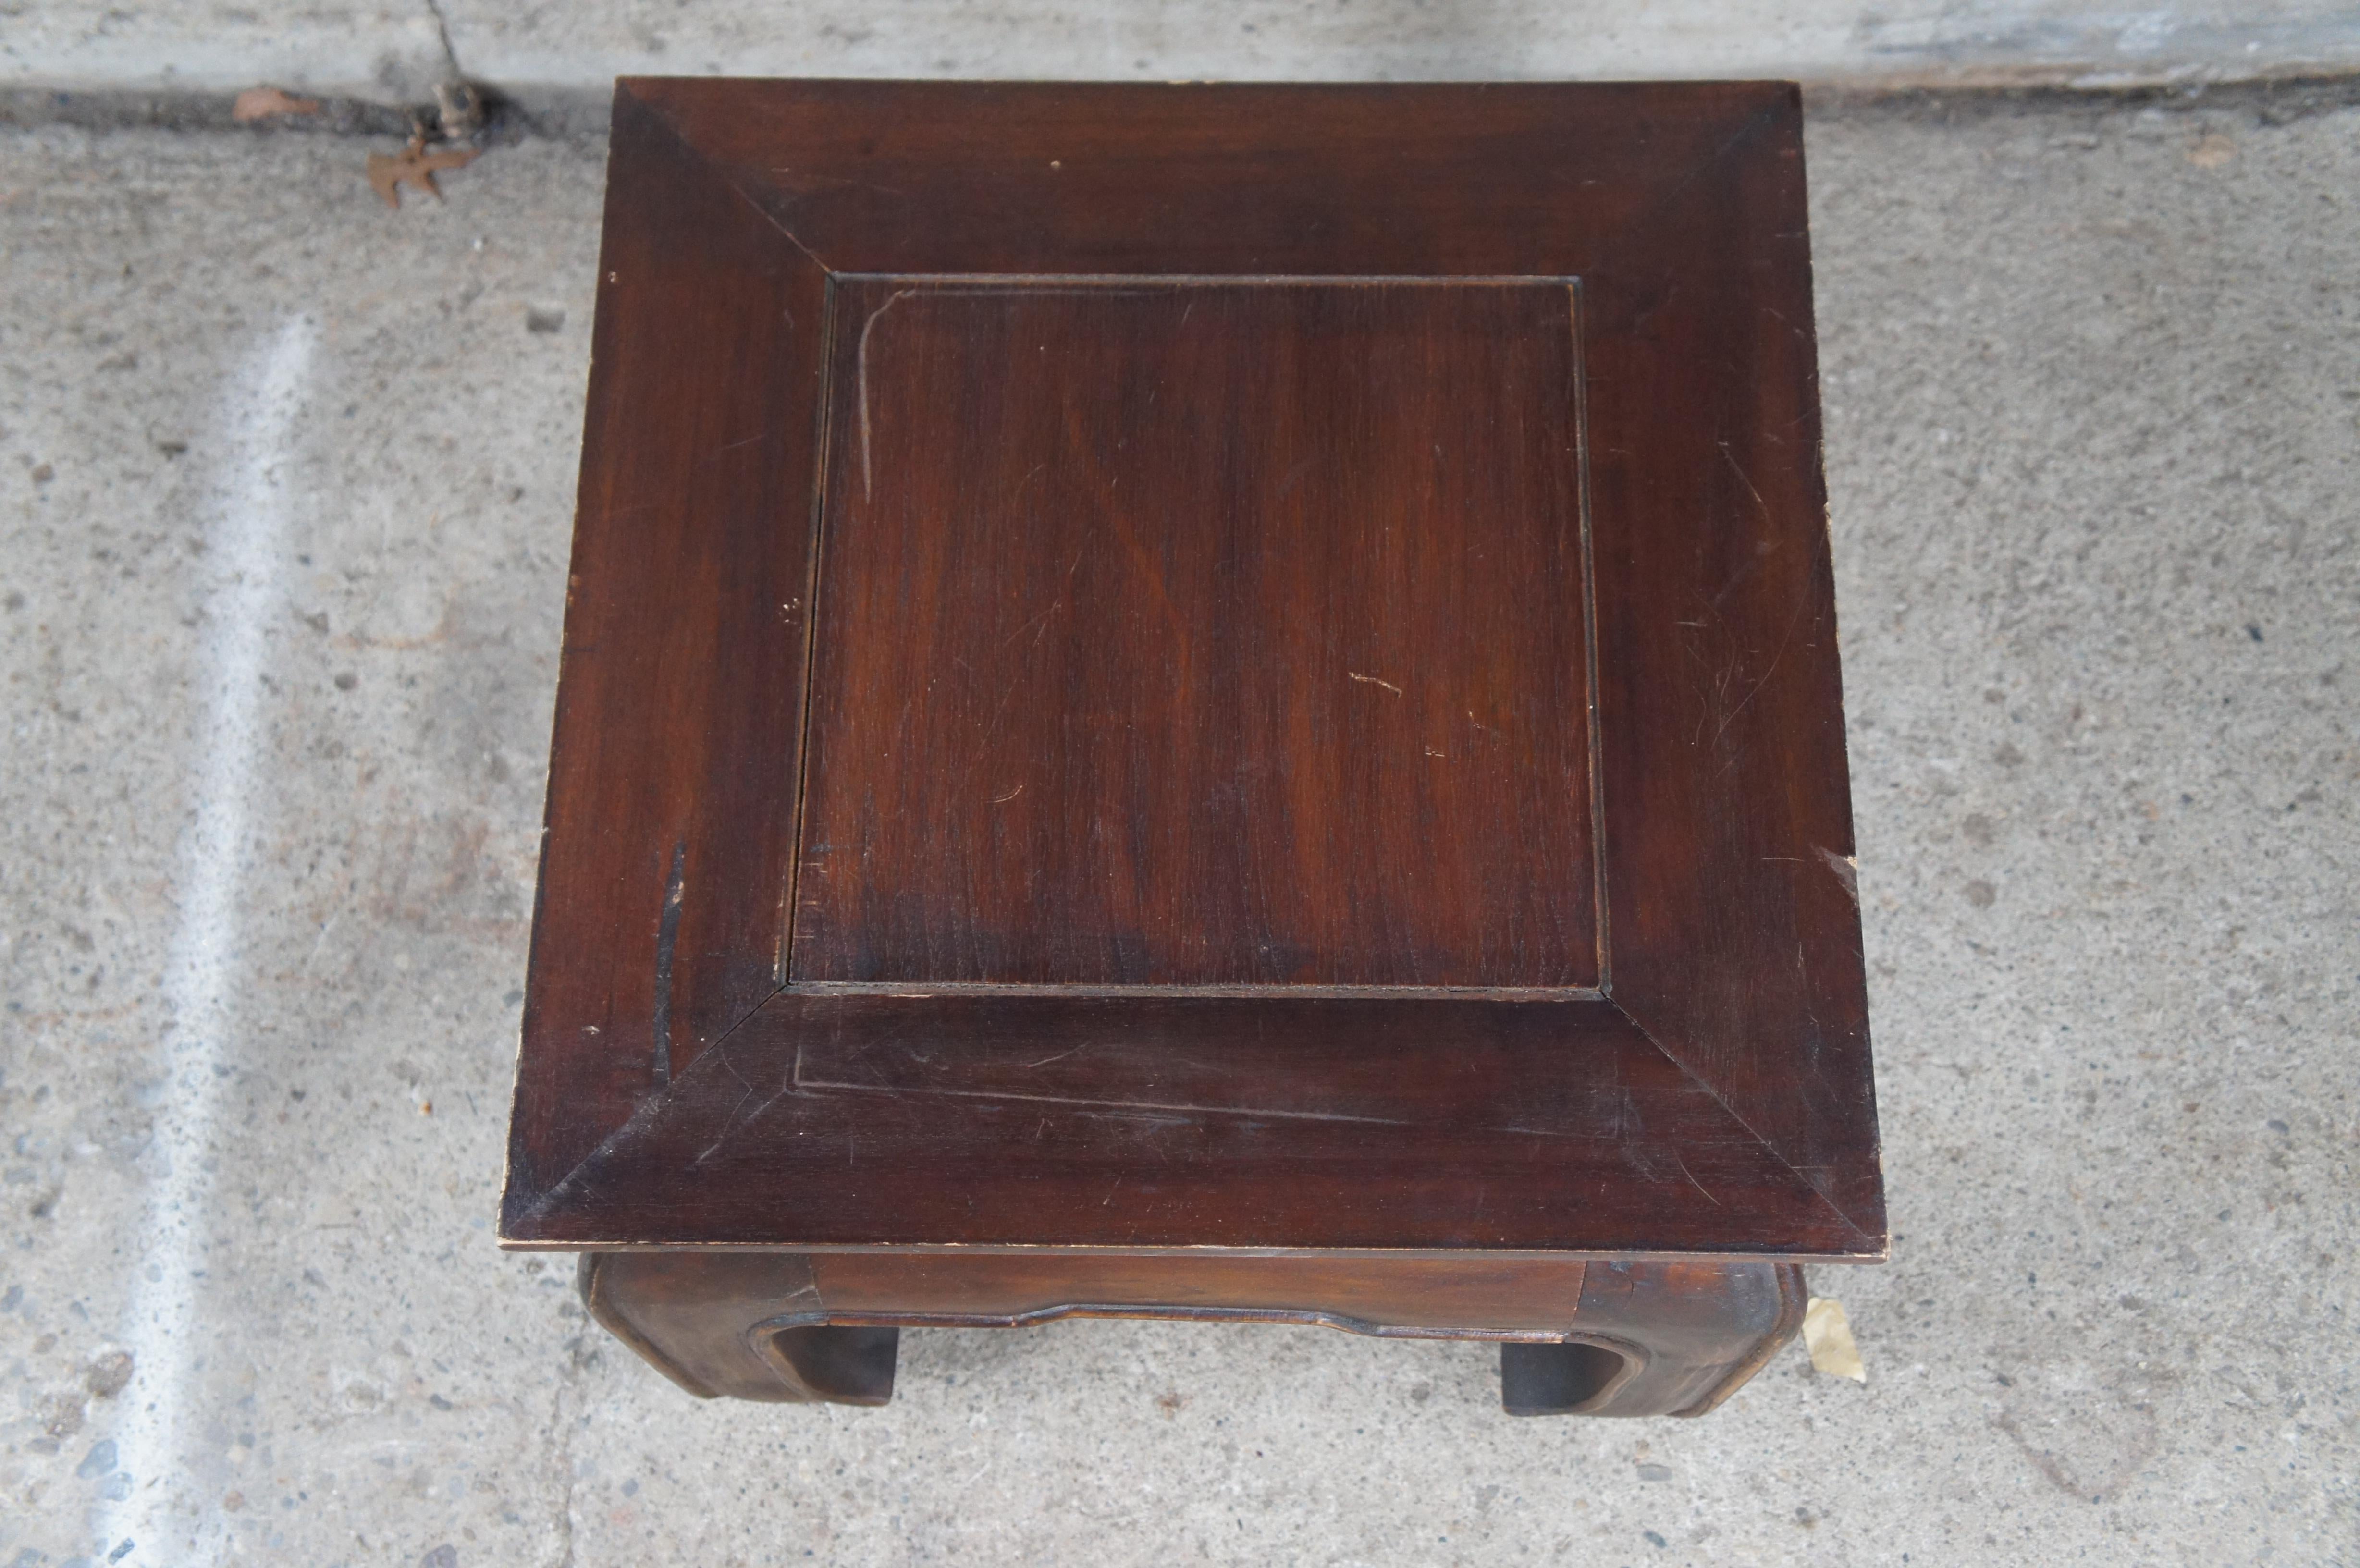 20th Century Chinese Ming Style Teak Square Side Table Sculpture Stand Stool 18